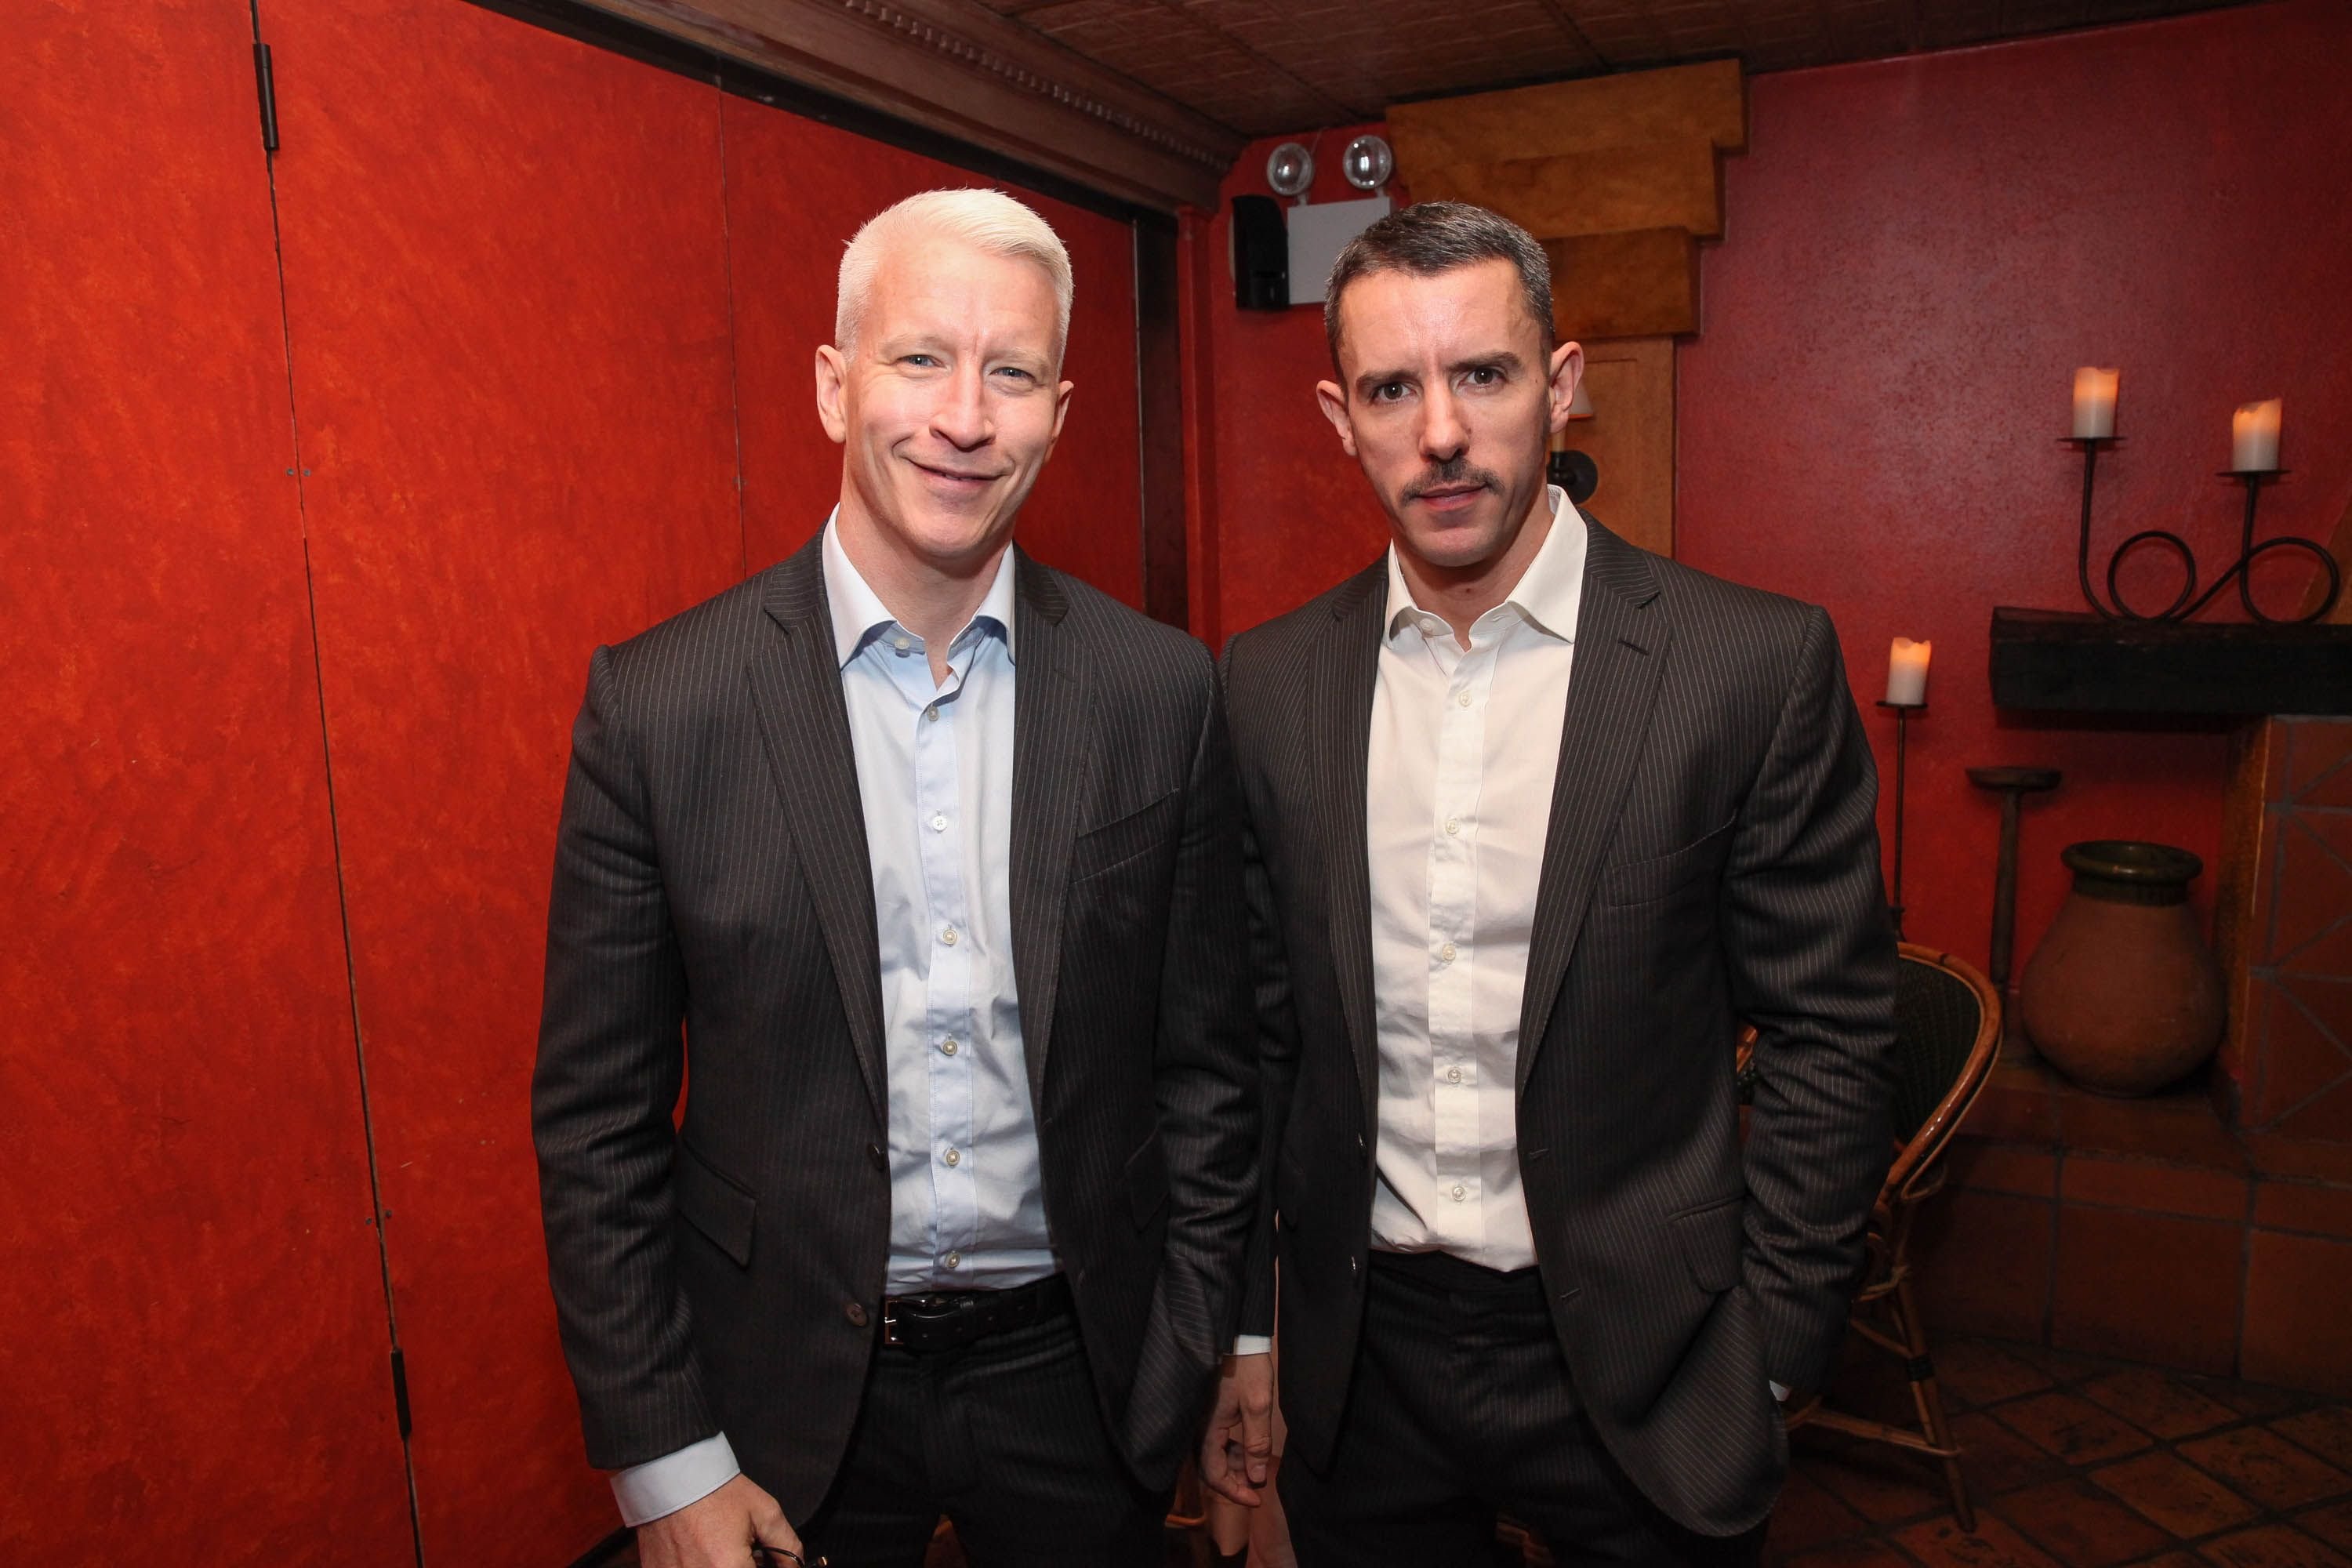 Anderson Cooper and Benjamin Maisani at Kathy Griffin's Carnegie Hall Performance official afterparty on November 8, 2013, in New York City. | Source: Rob Kim/Getty Images